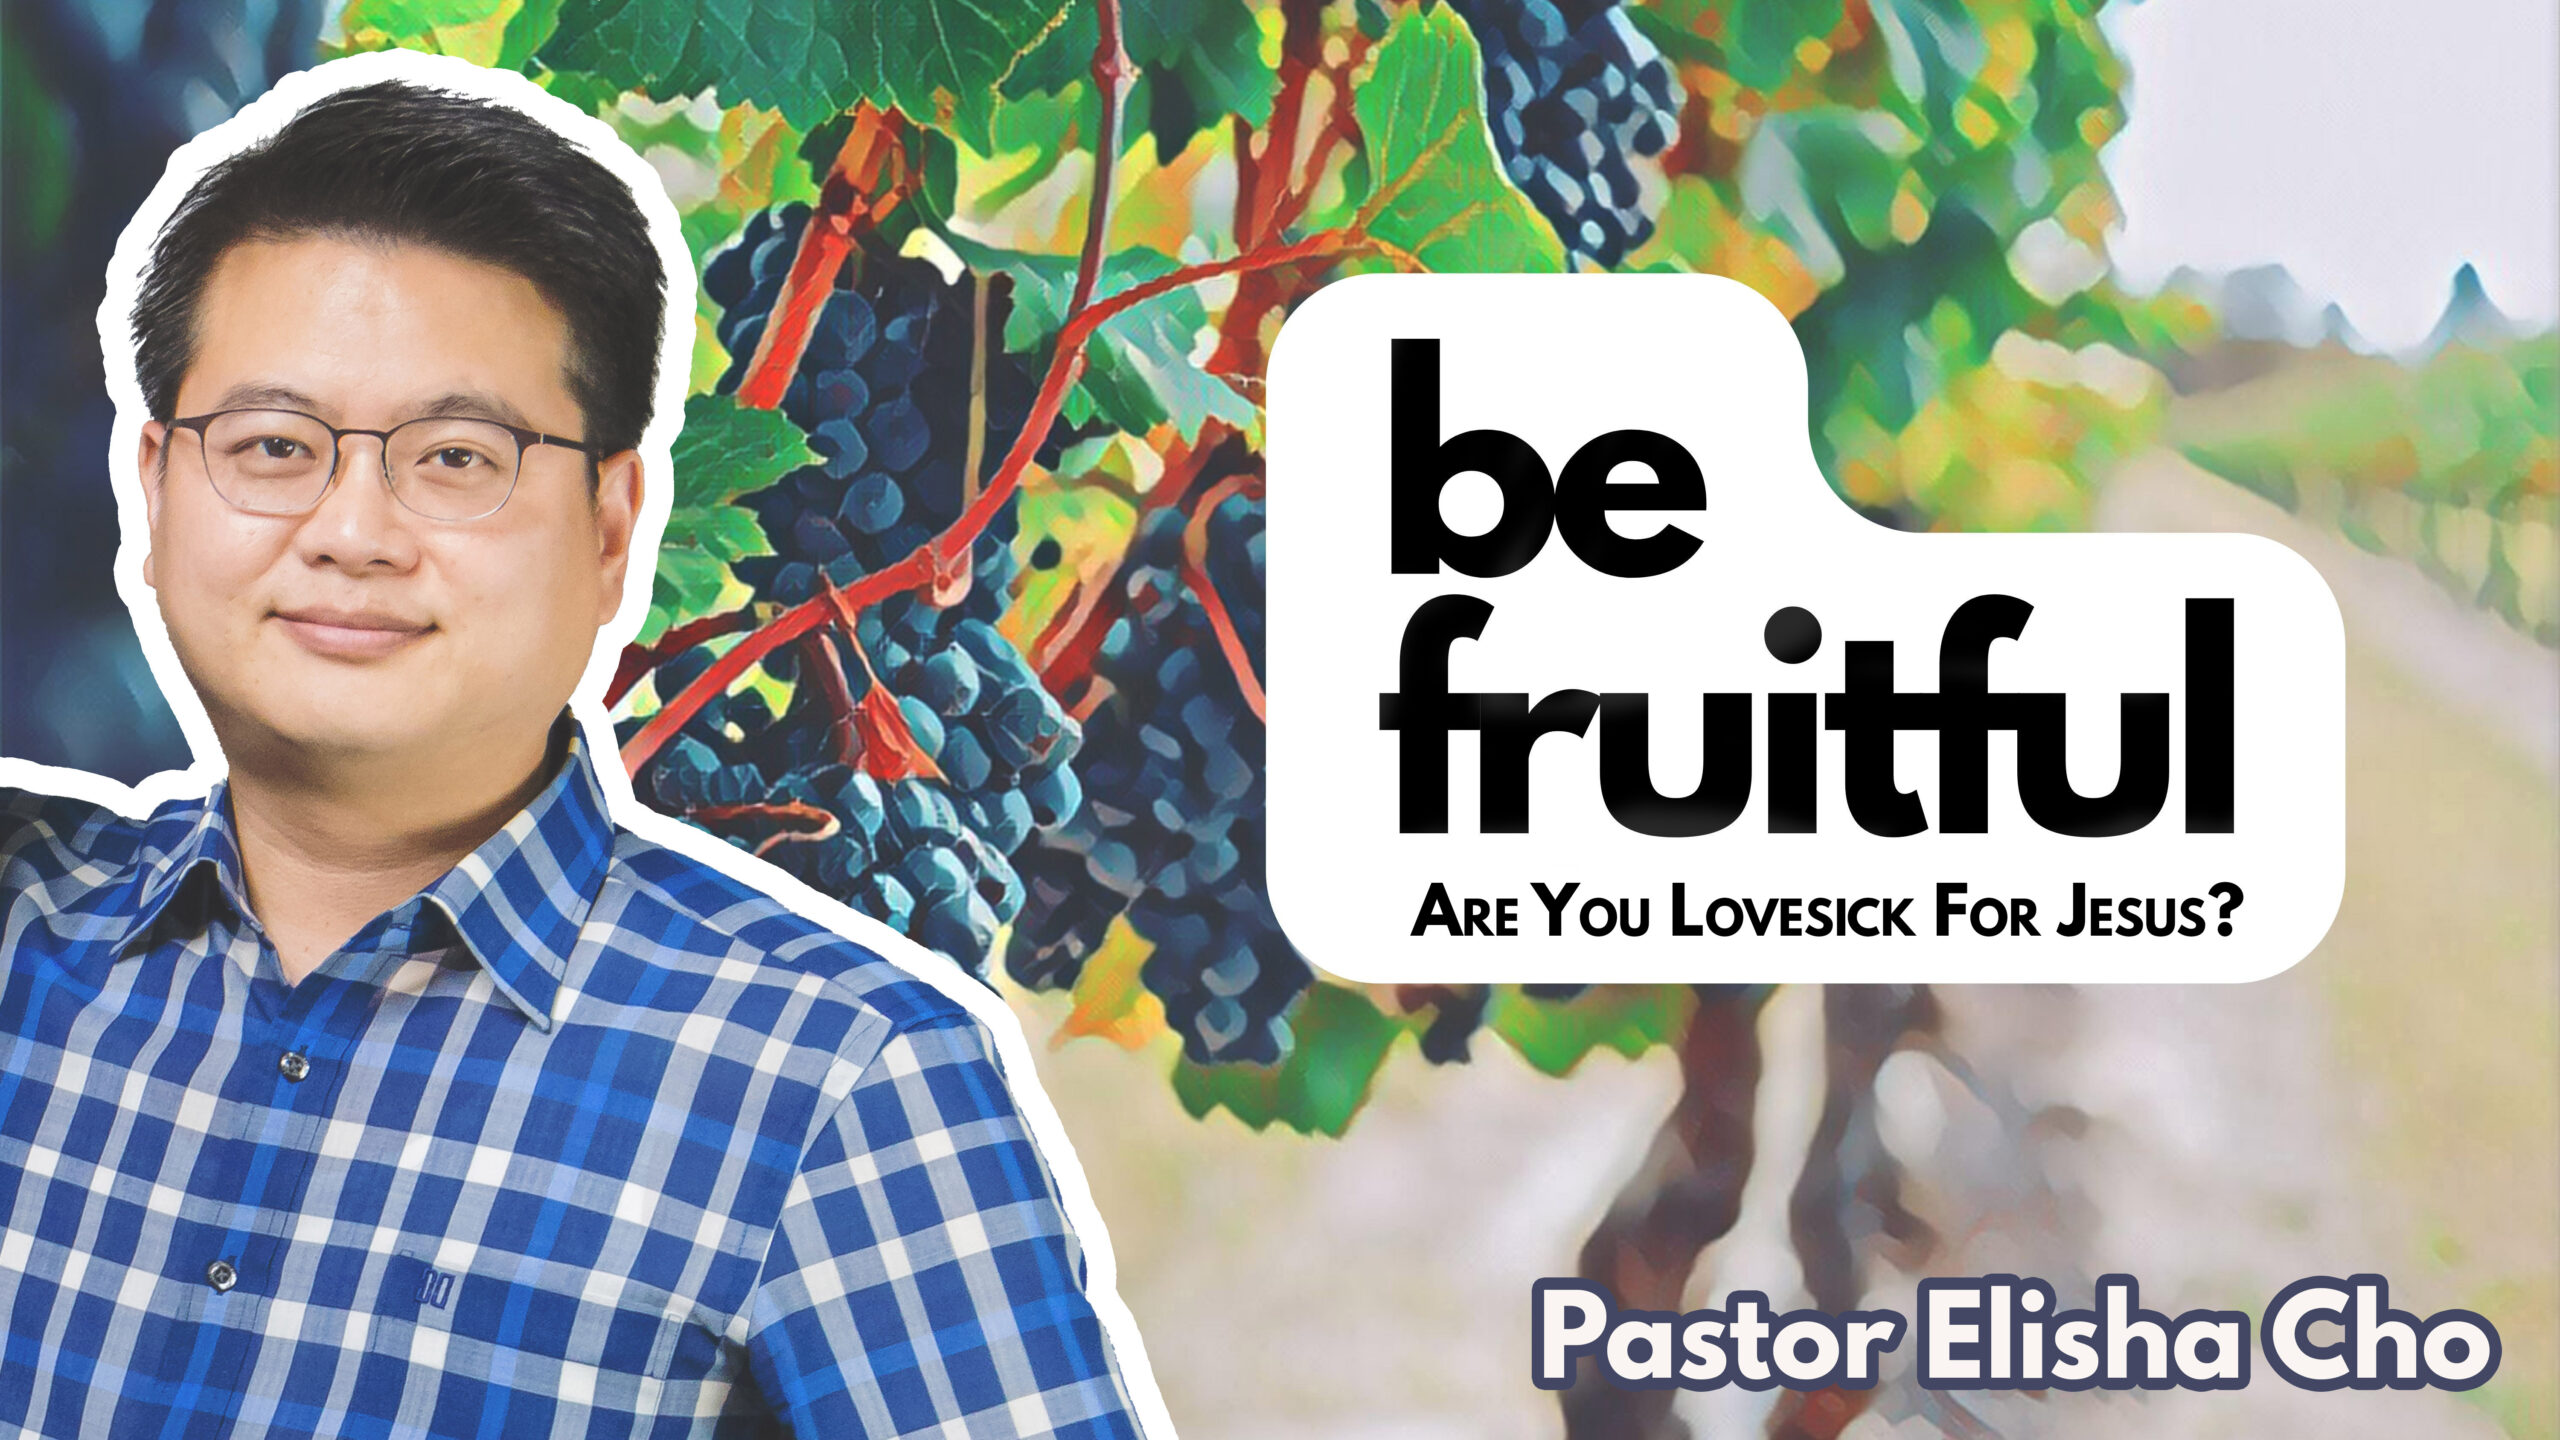 3 – Are You Lovesick For Jesus?